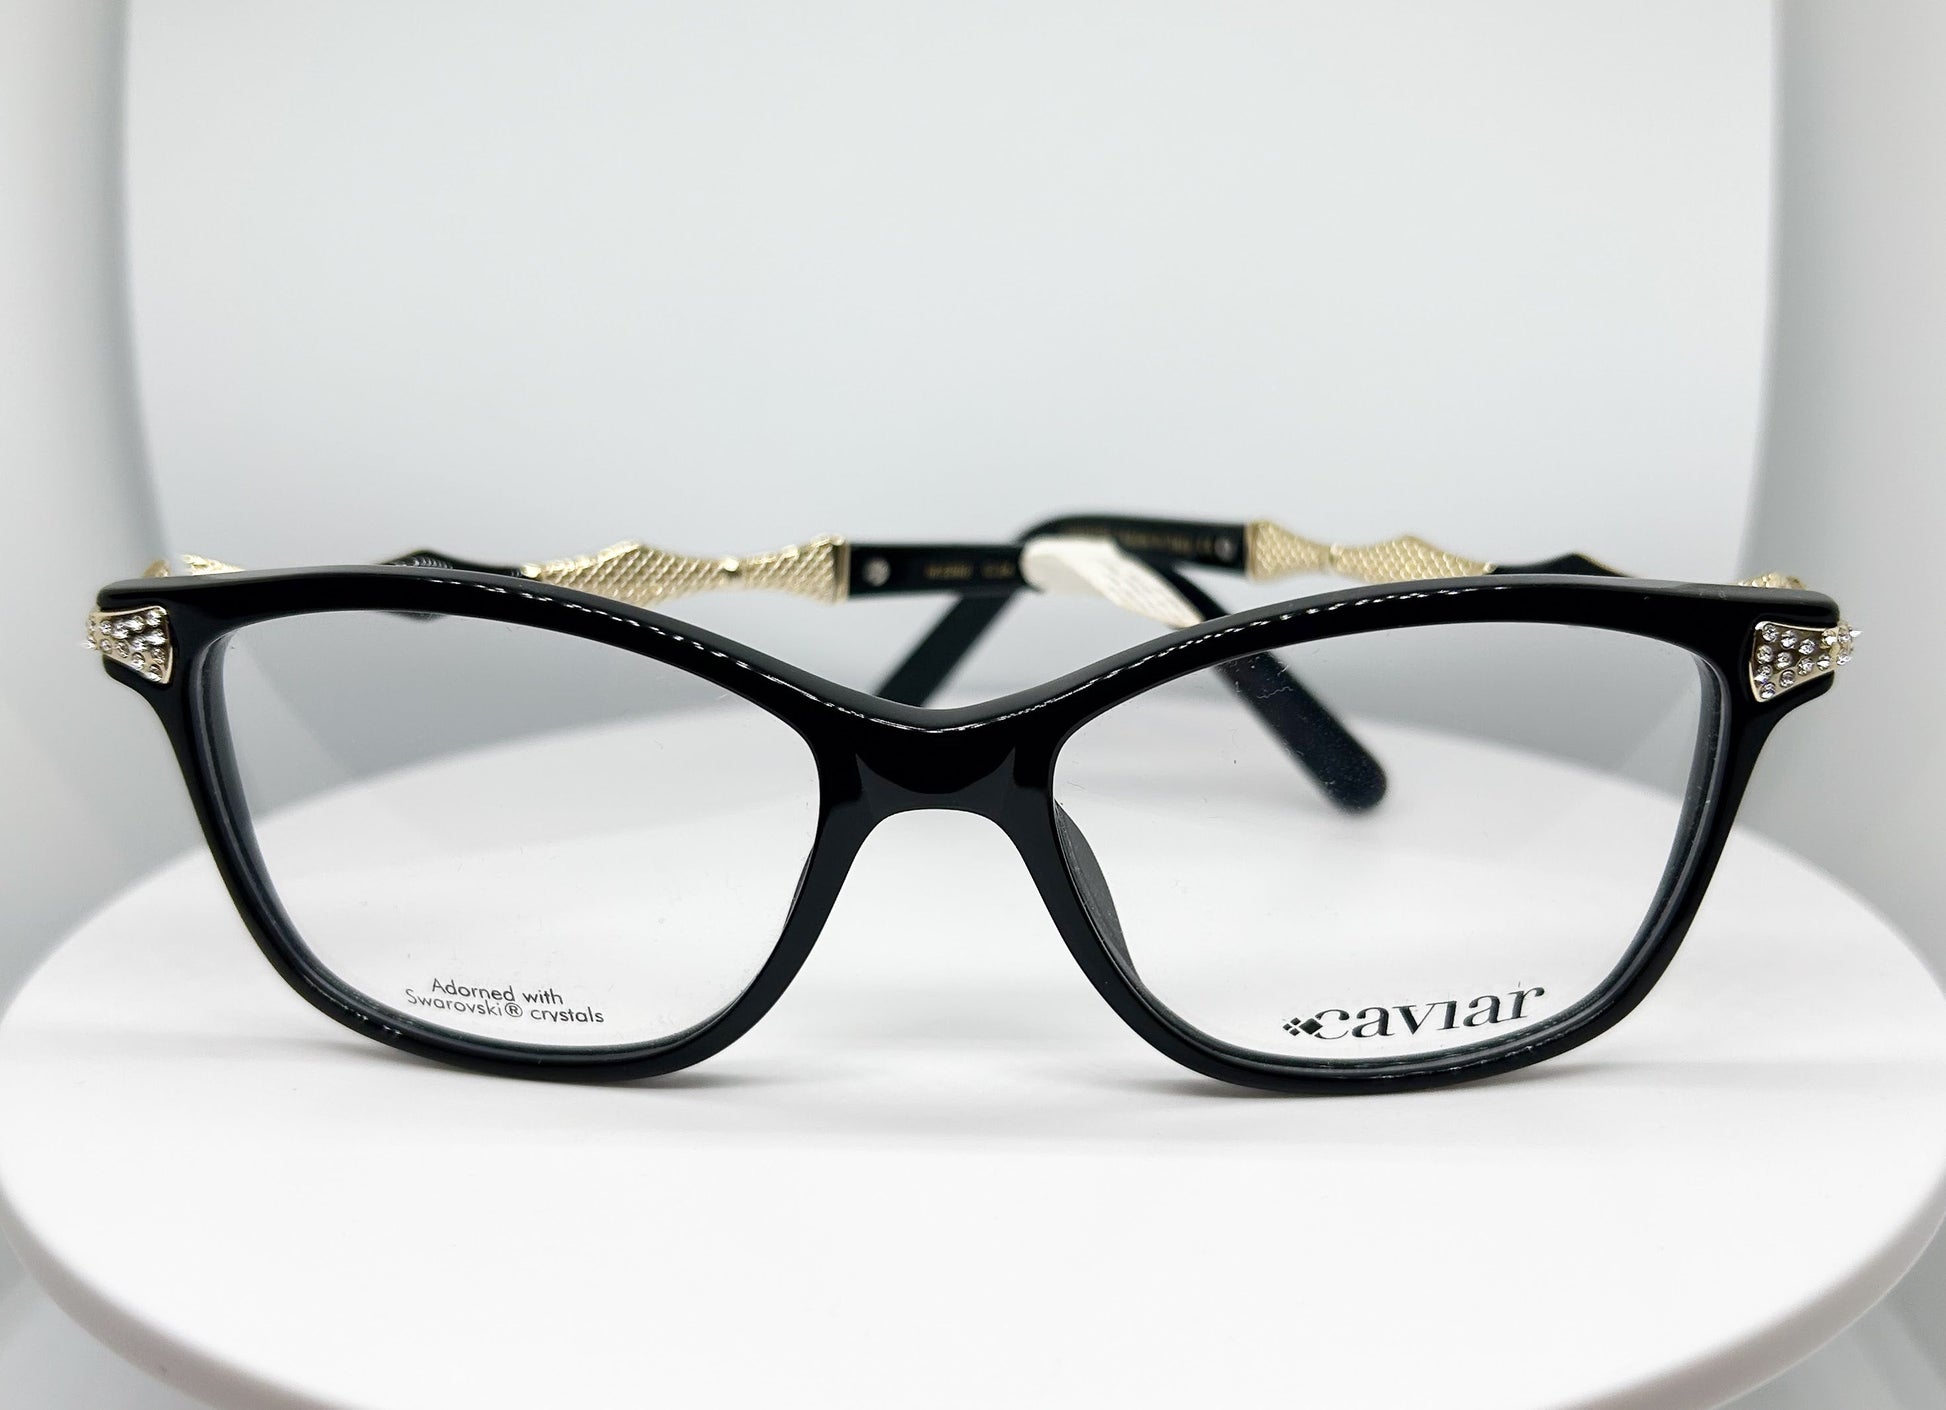 Buy Caviar  M2392, a  Black, Gold; Acetate, Metal Optical Frame with a Square shape. Adair Eyewear - 40+ Years History